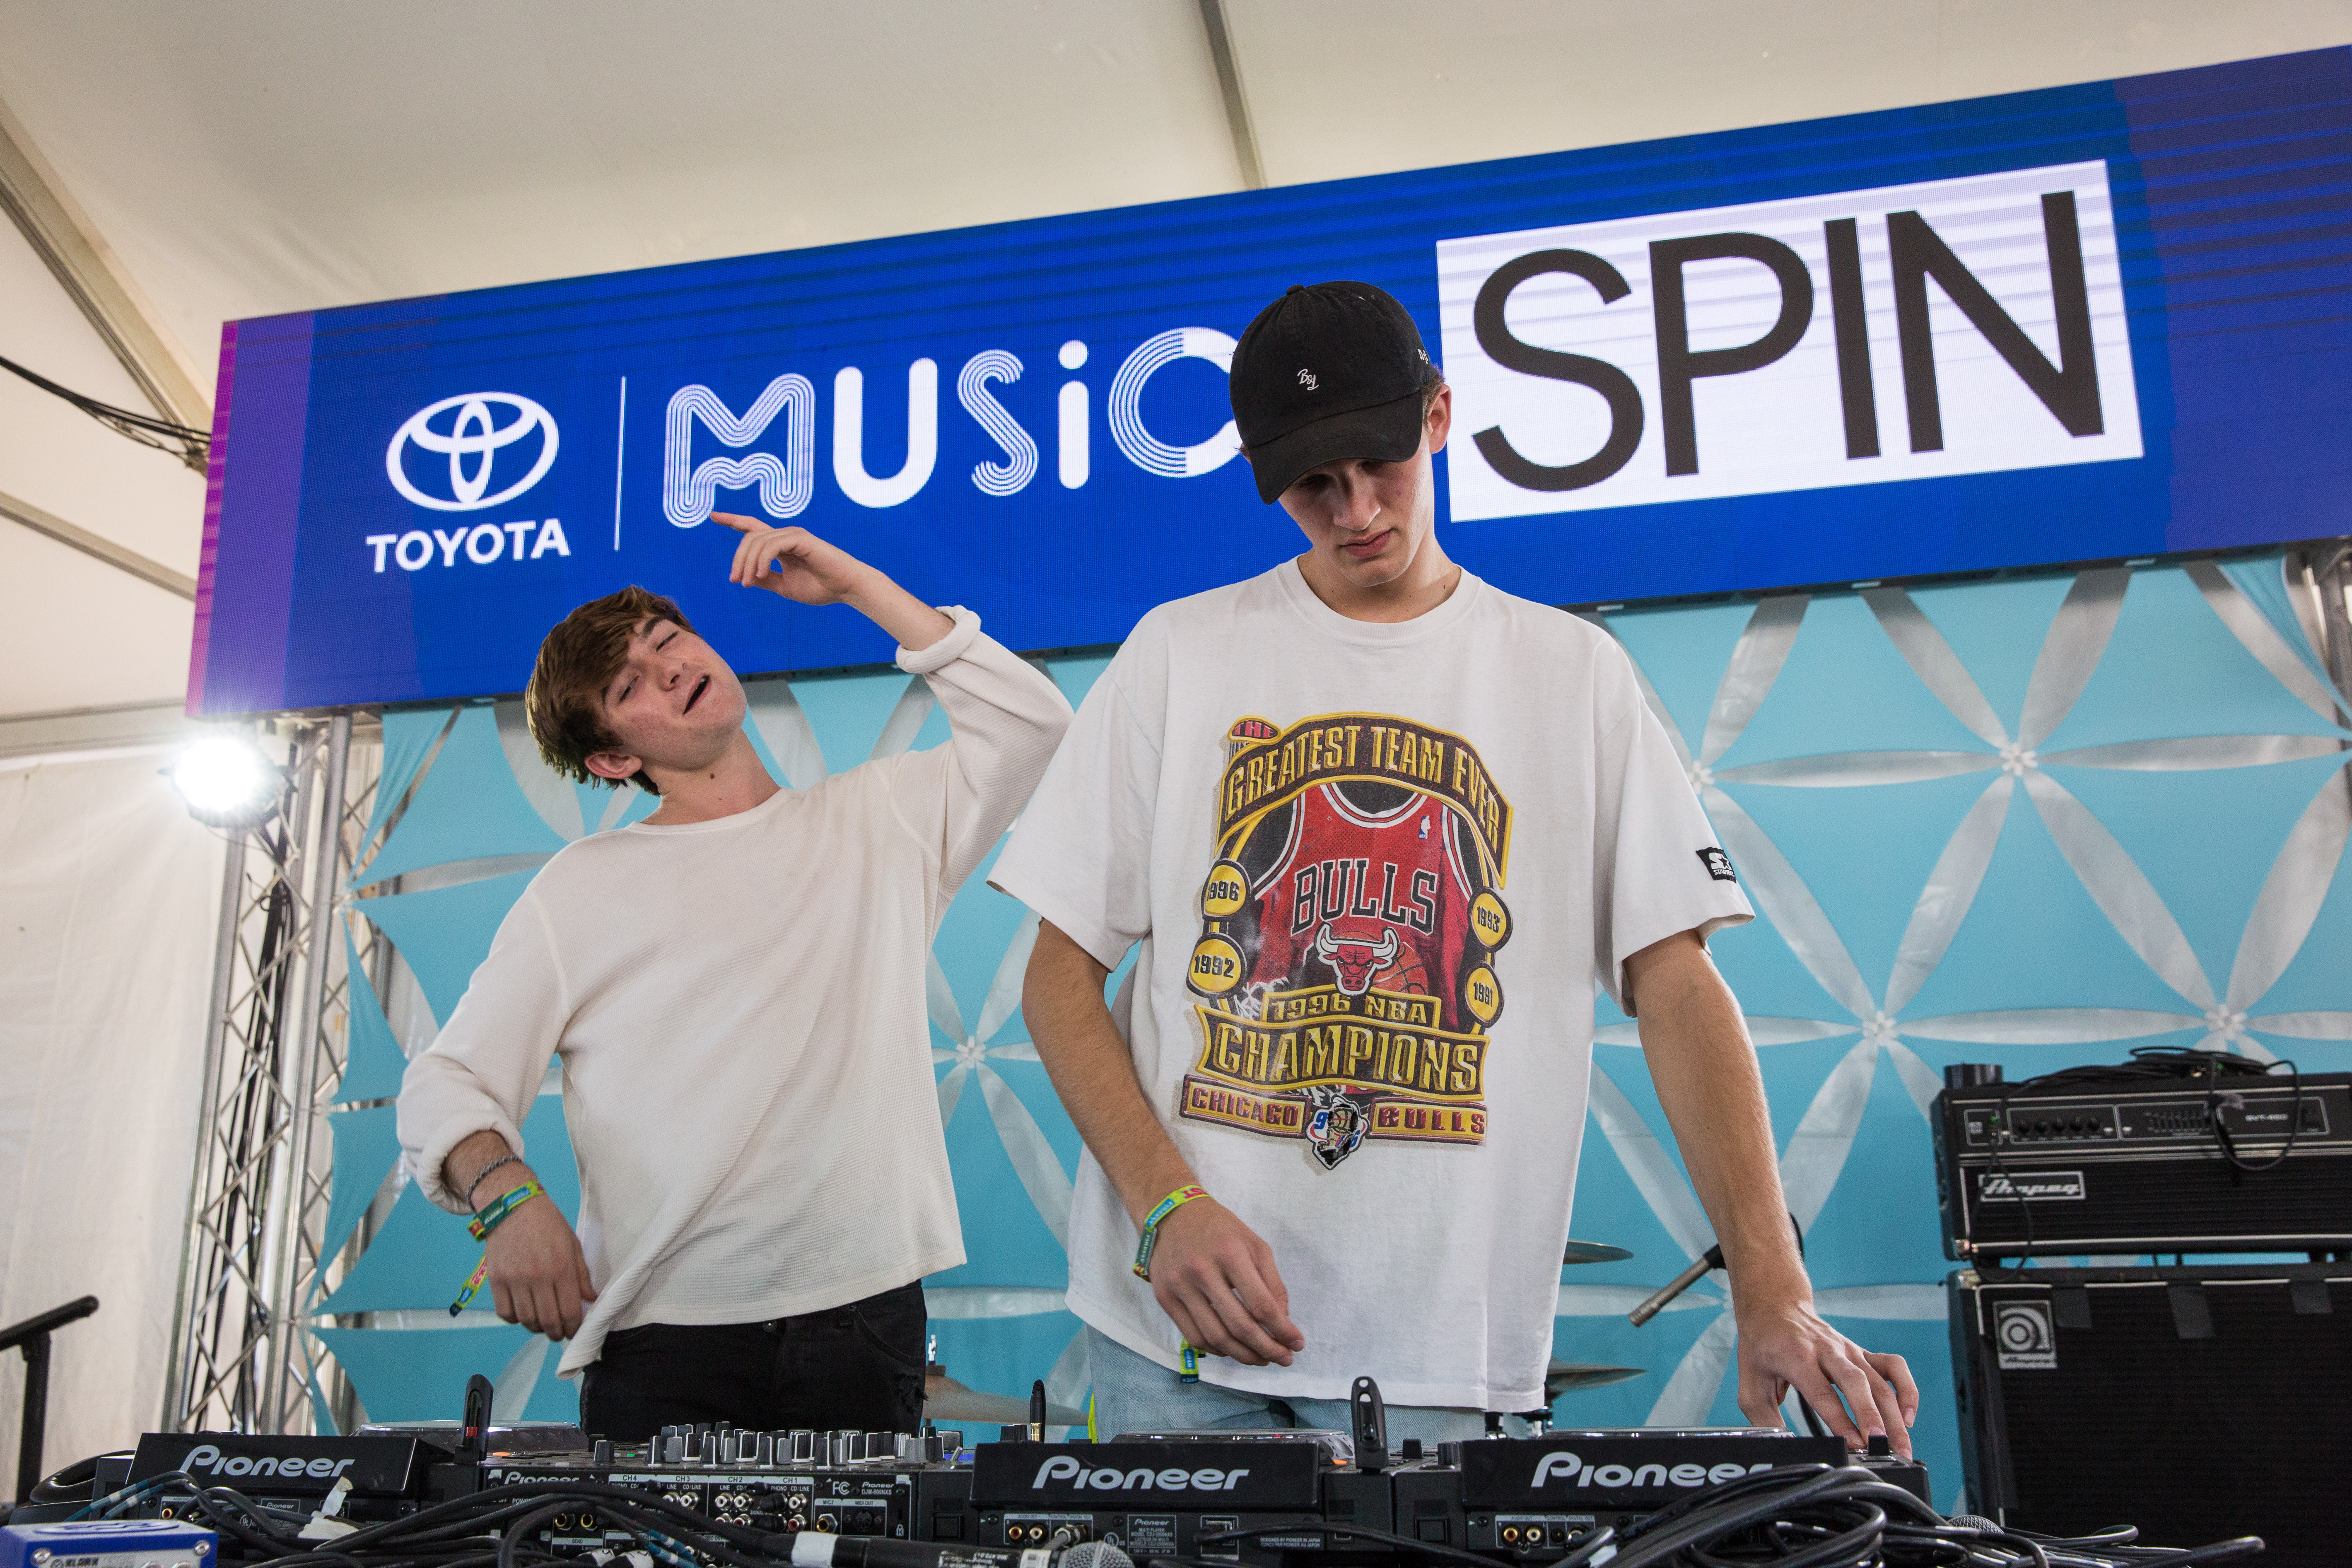 SPIN at Firefly 2016: Day 3 at Toyota Music Den with Major Lazer's Walshy Fire, Wet, and More